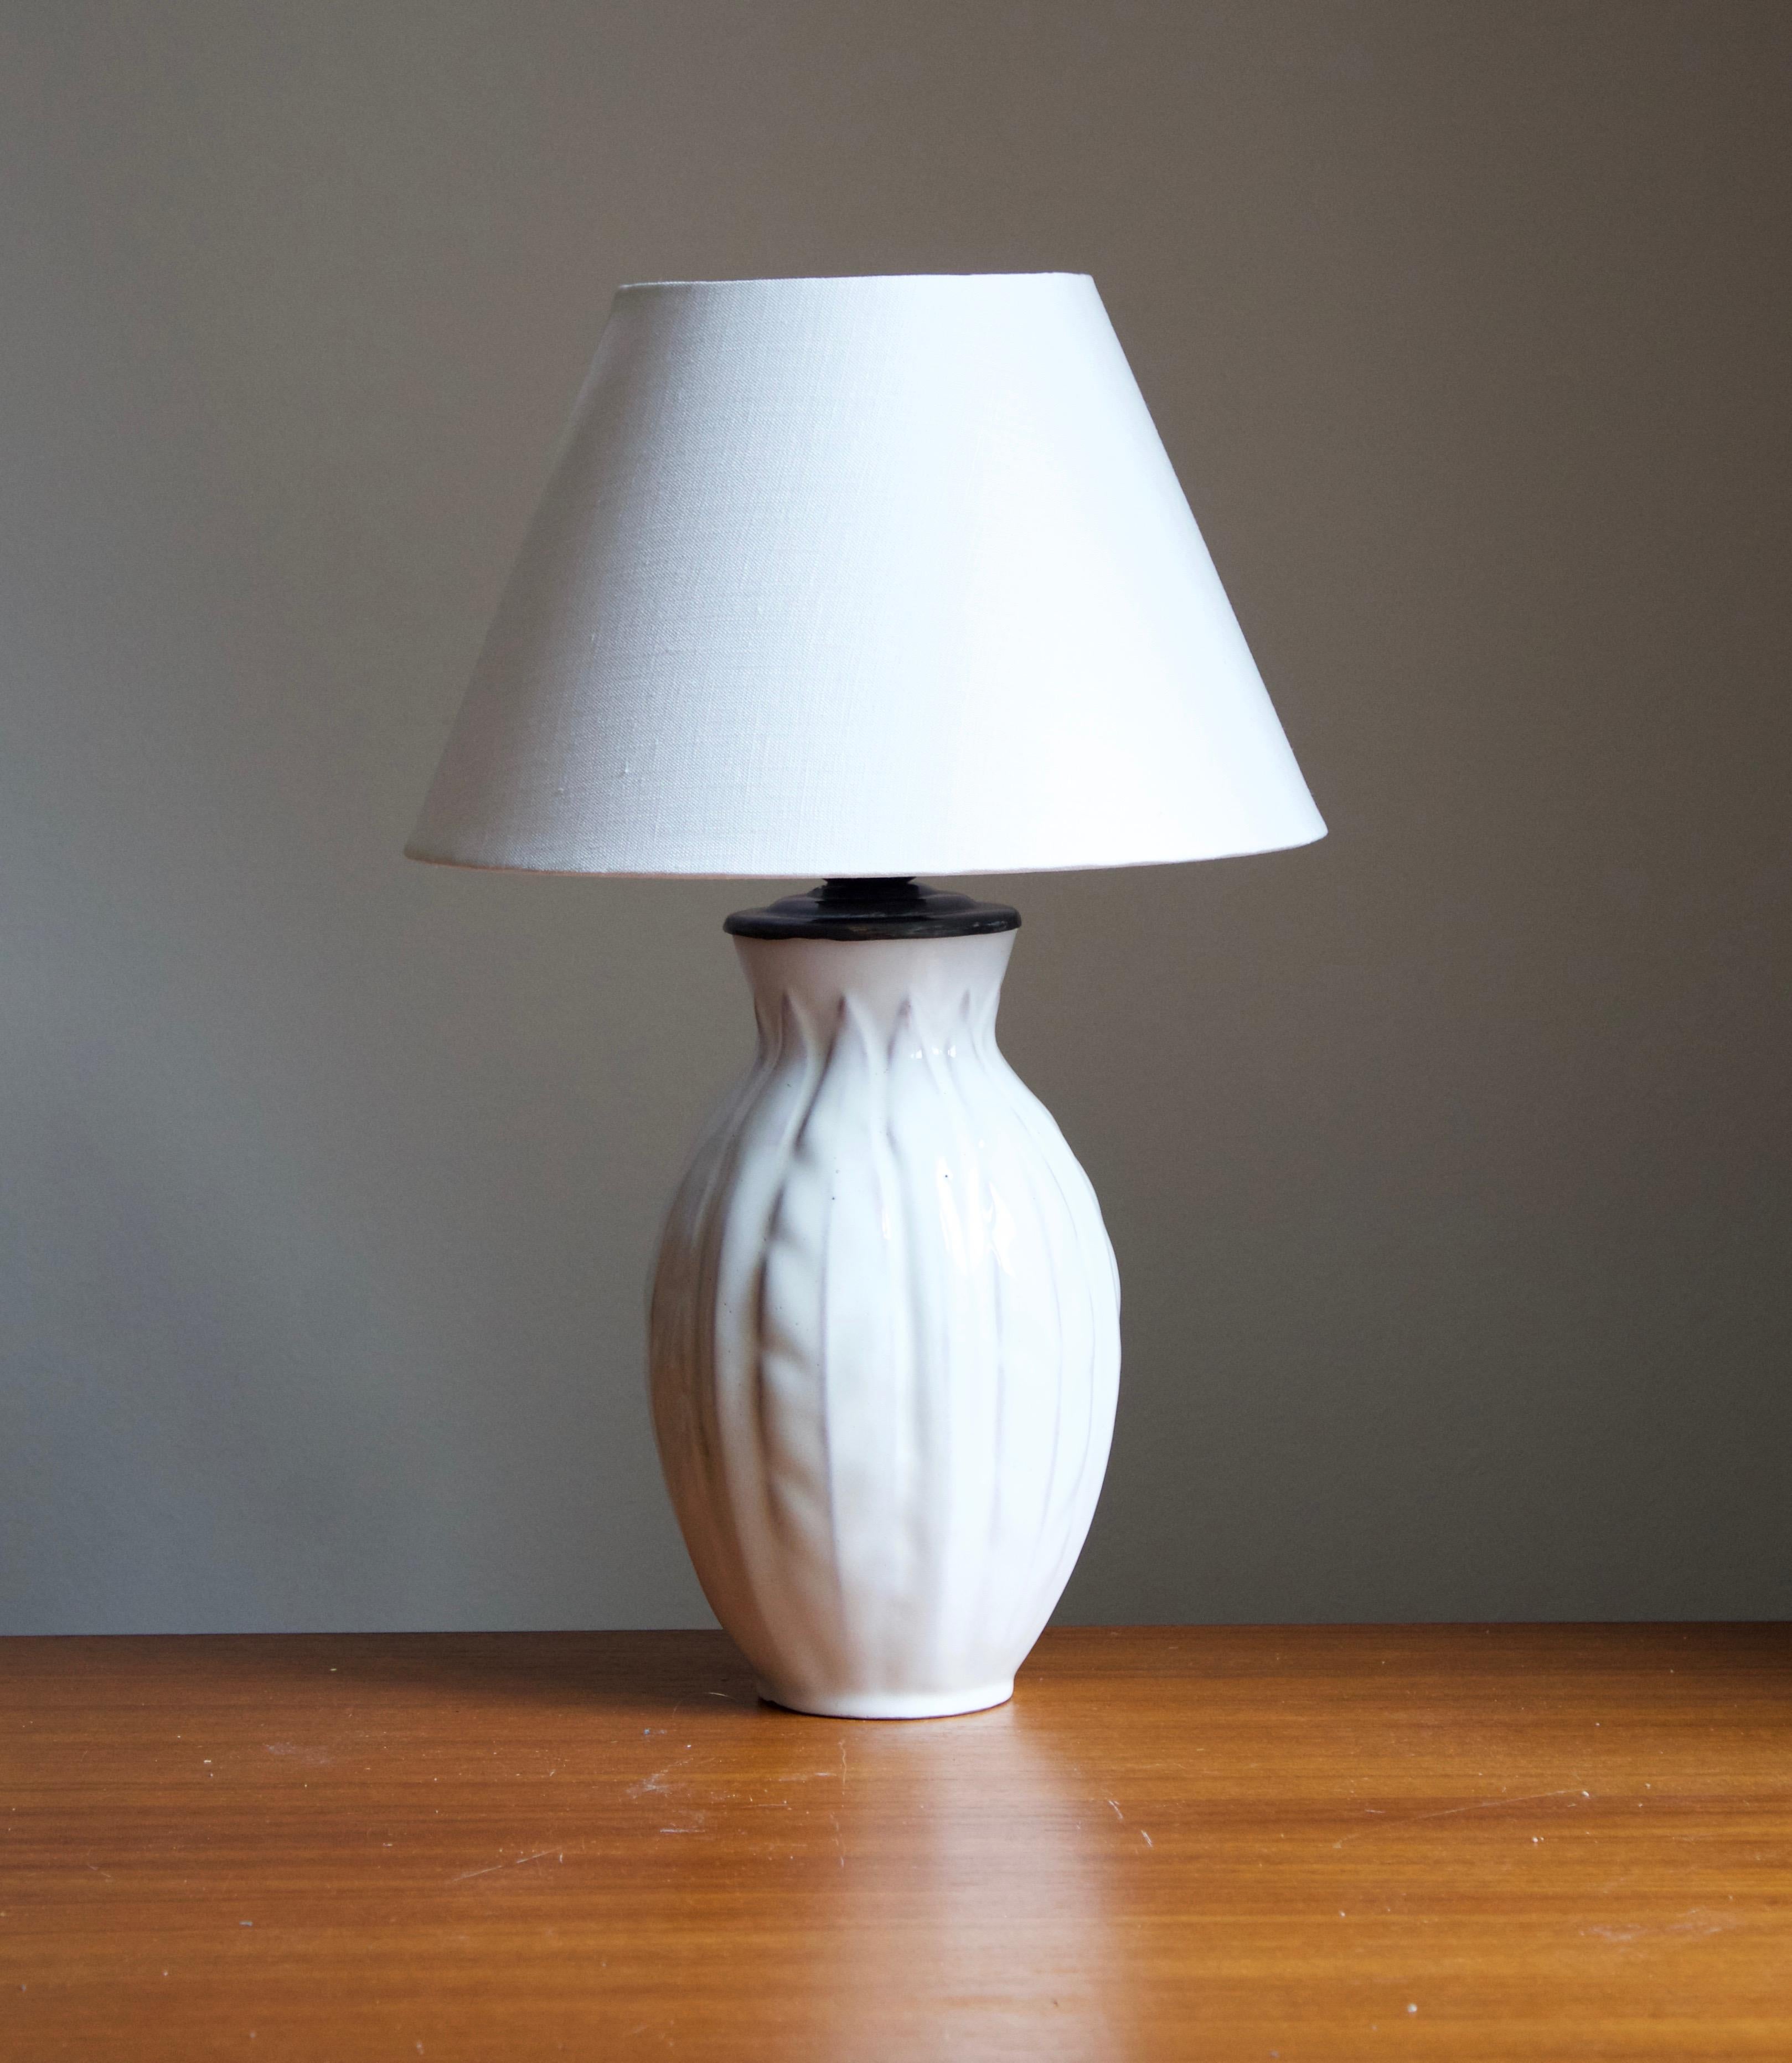 An early modernist table lamp. Designed by Anna-Lisa Thomson, for Upsala-Ekeby, Sweden, 1940s. 

Stated dimensions exclude lampshade. Height includes socket. Shade is not included in purchase.

Glaze features a white color.

Other designers of the